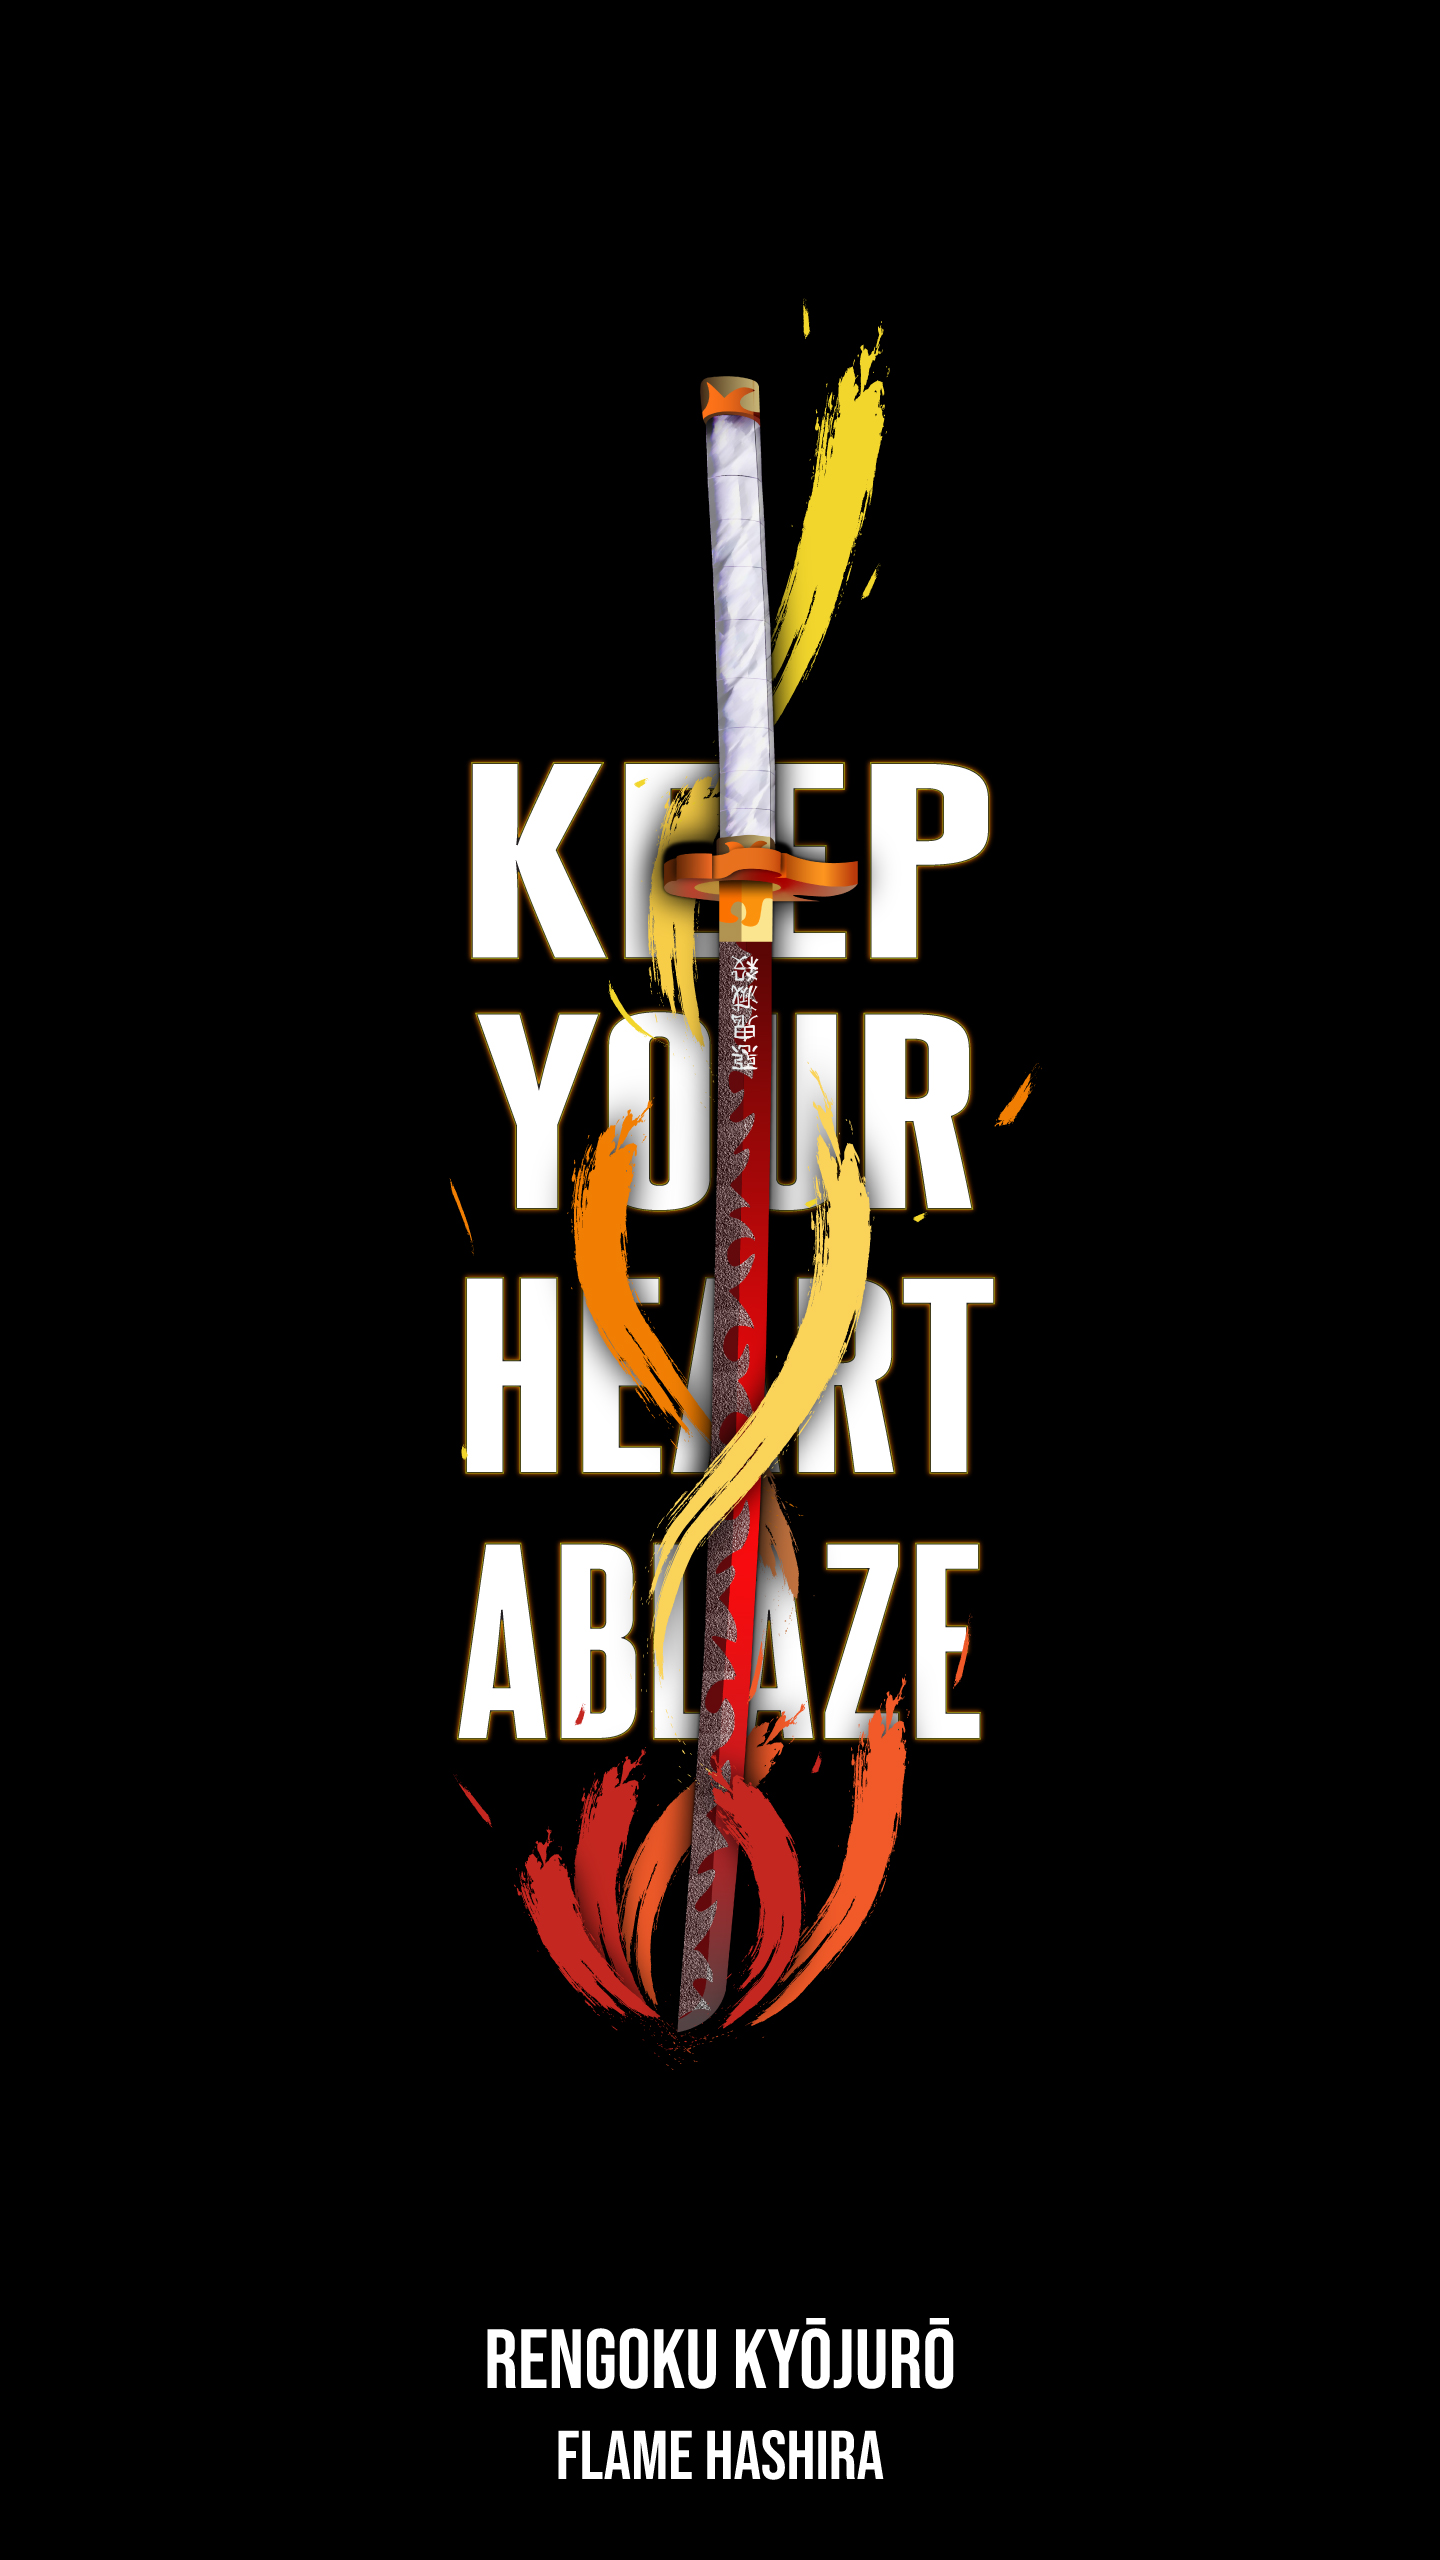 Keep Your Heart Ablaze by Chilled_Ice.editz